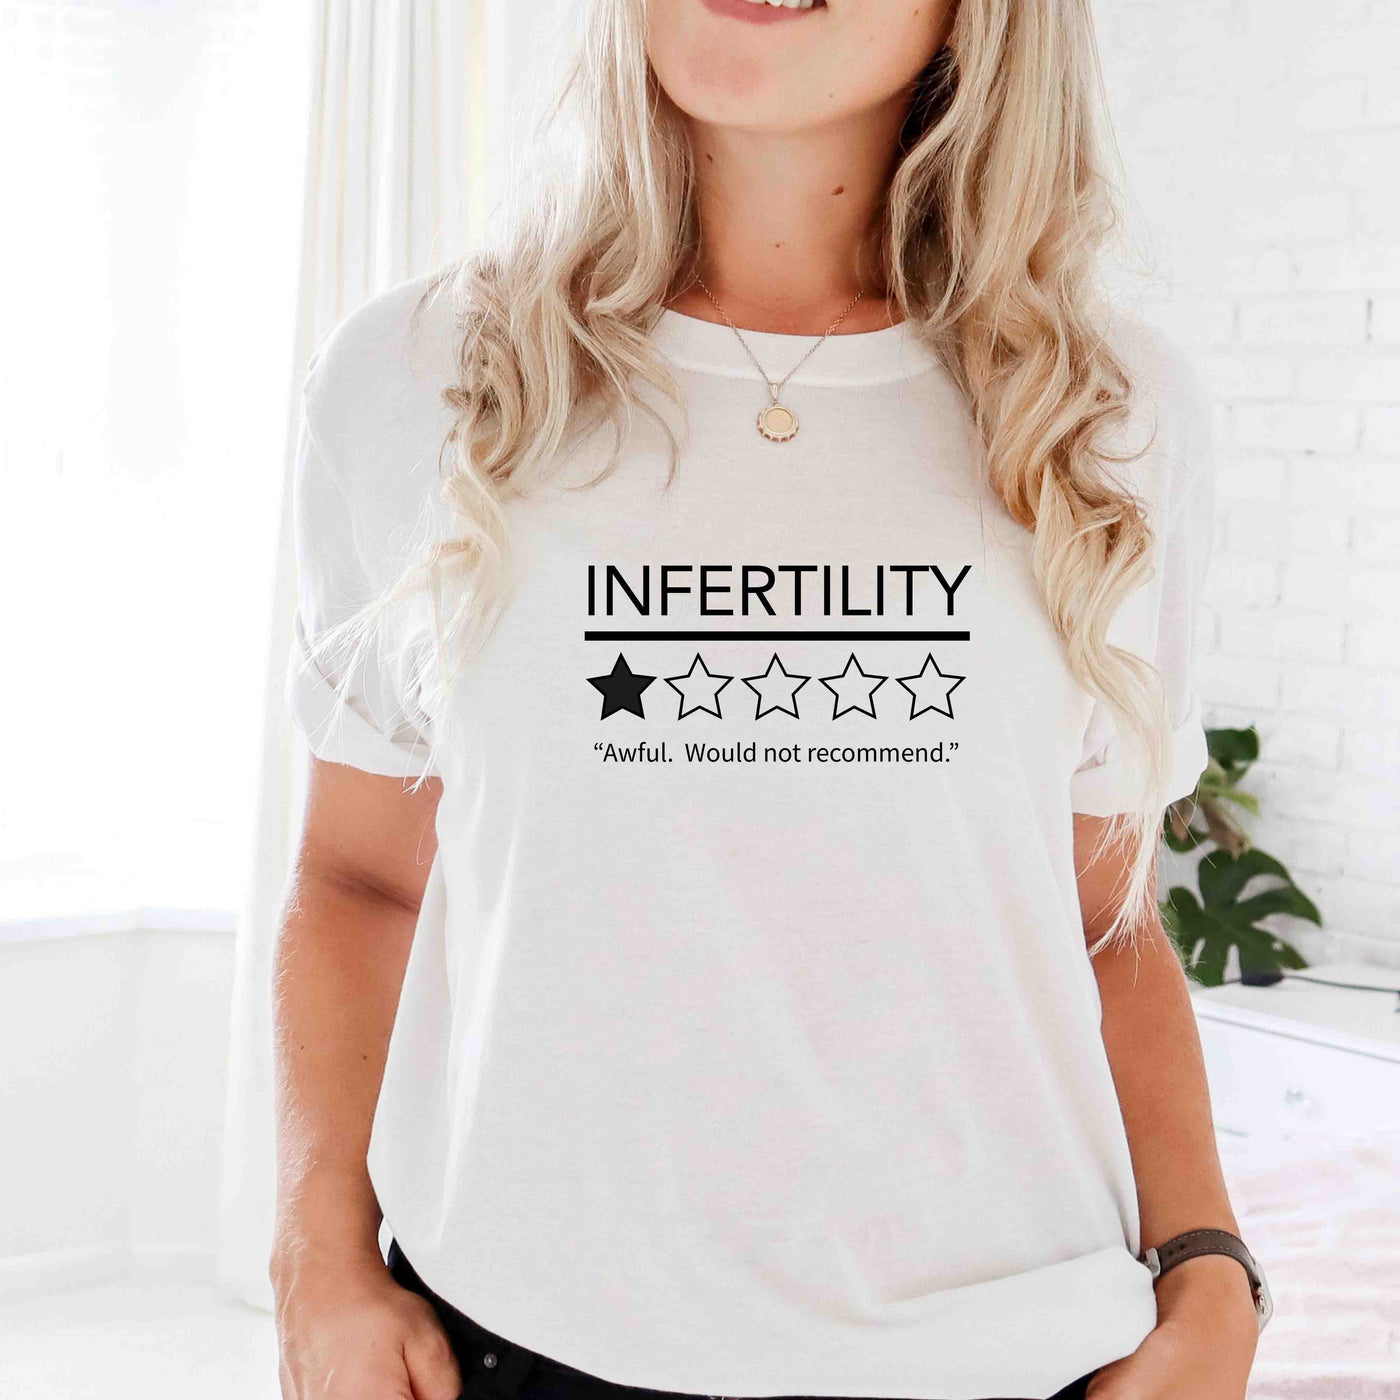 infertility rating graphic tee